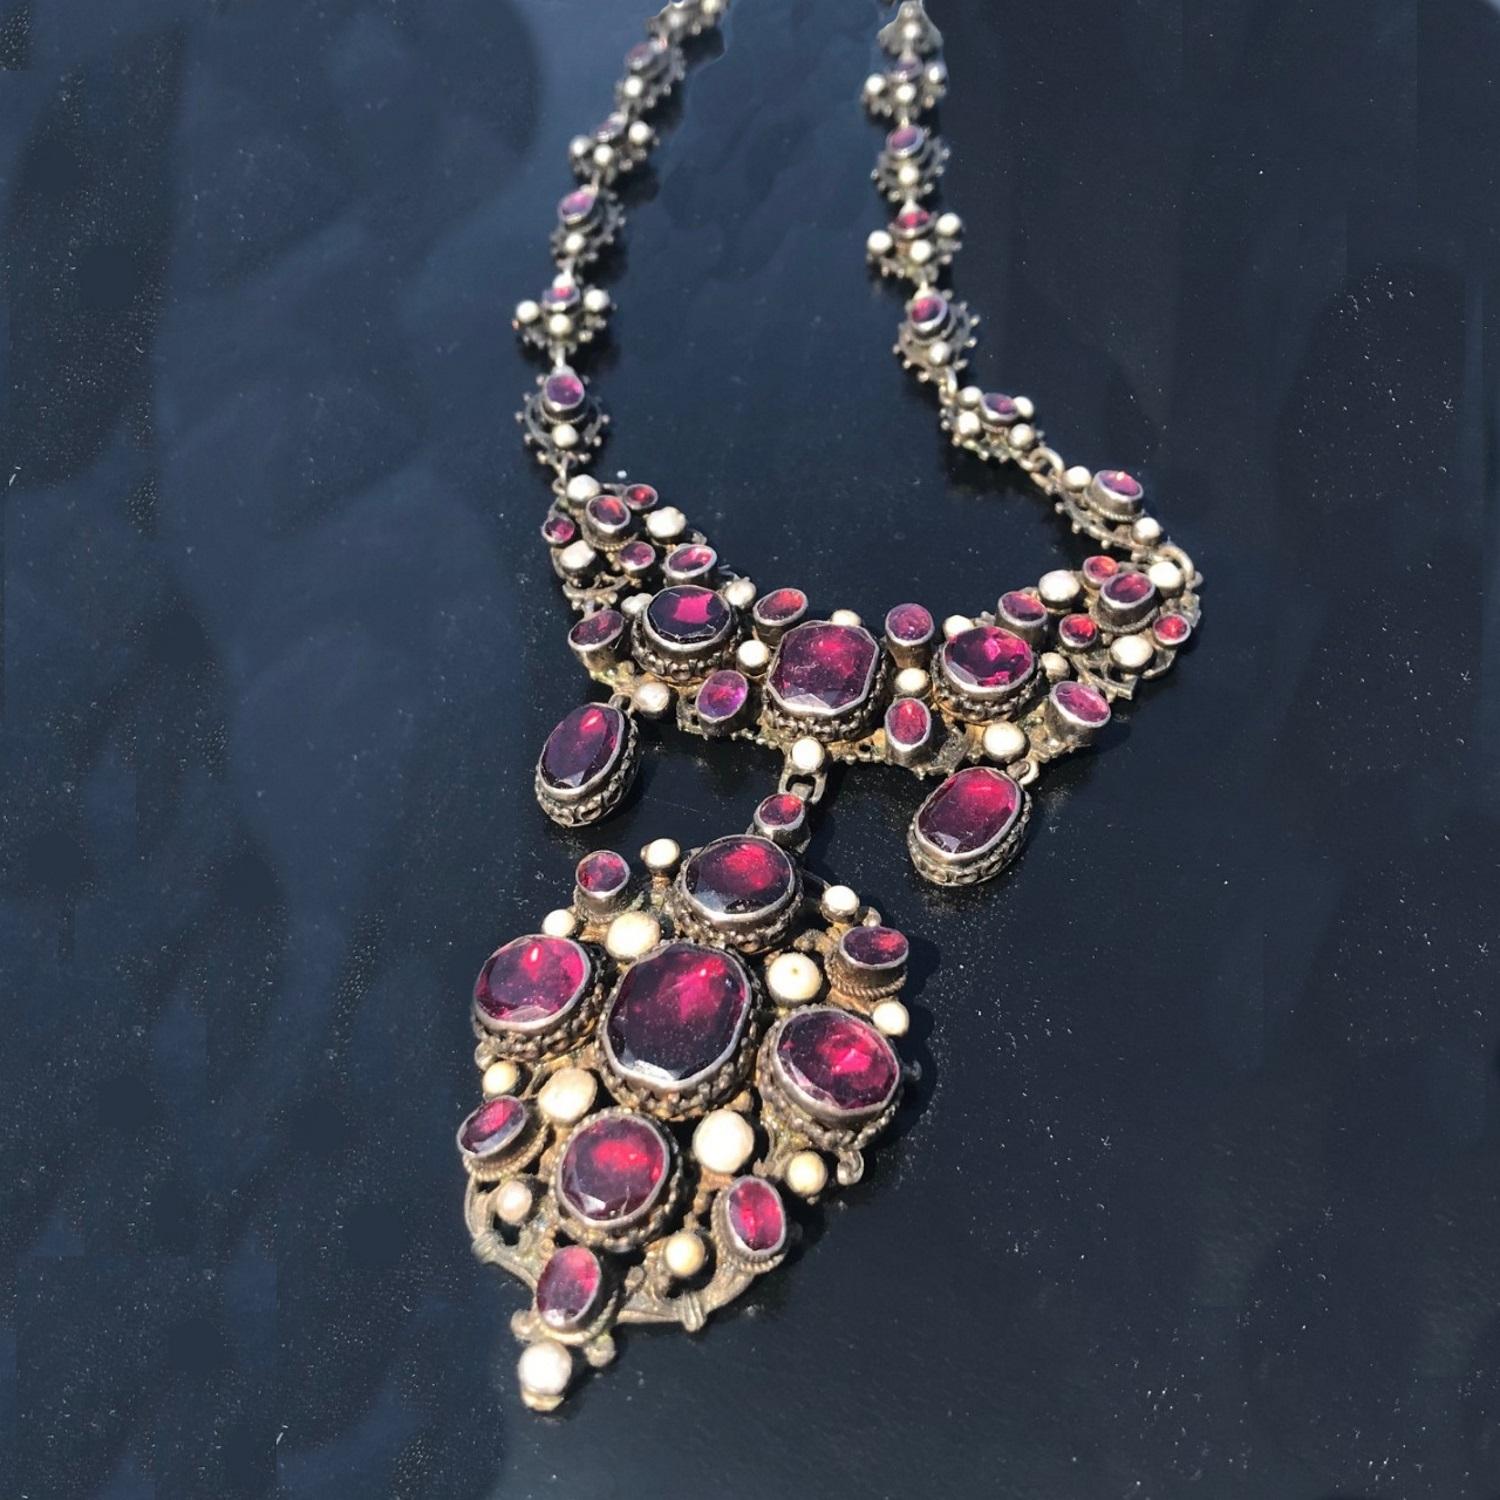 Victorian English Bib Necklace Garnets with Pearl Accents, circa 1870 For Sale 2